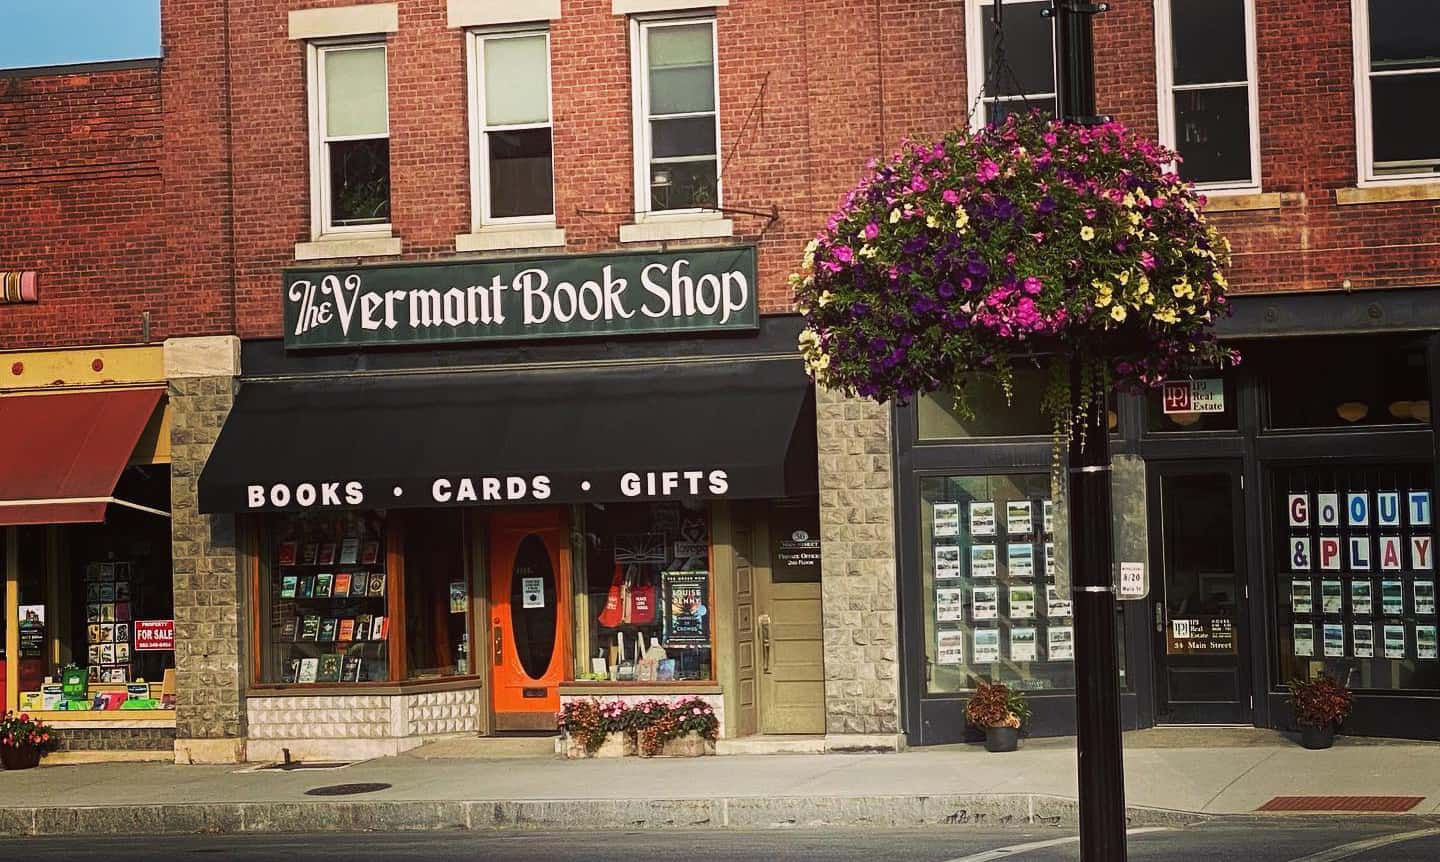 The Vermont Book Shop - Building Exterior - Cropped